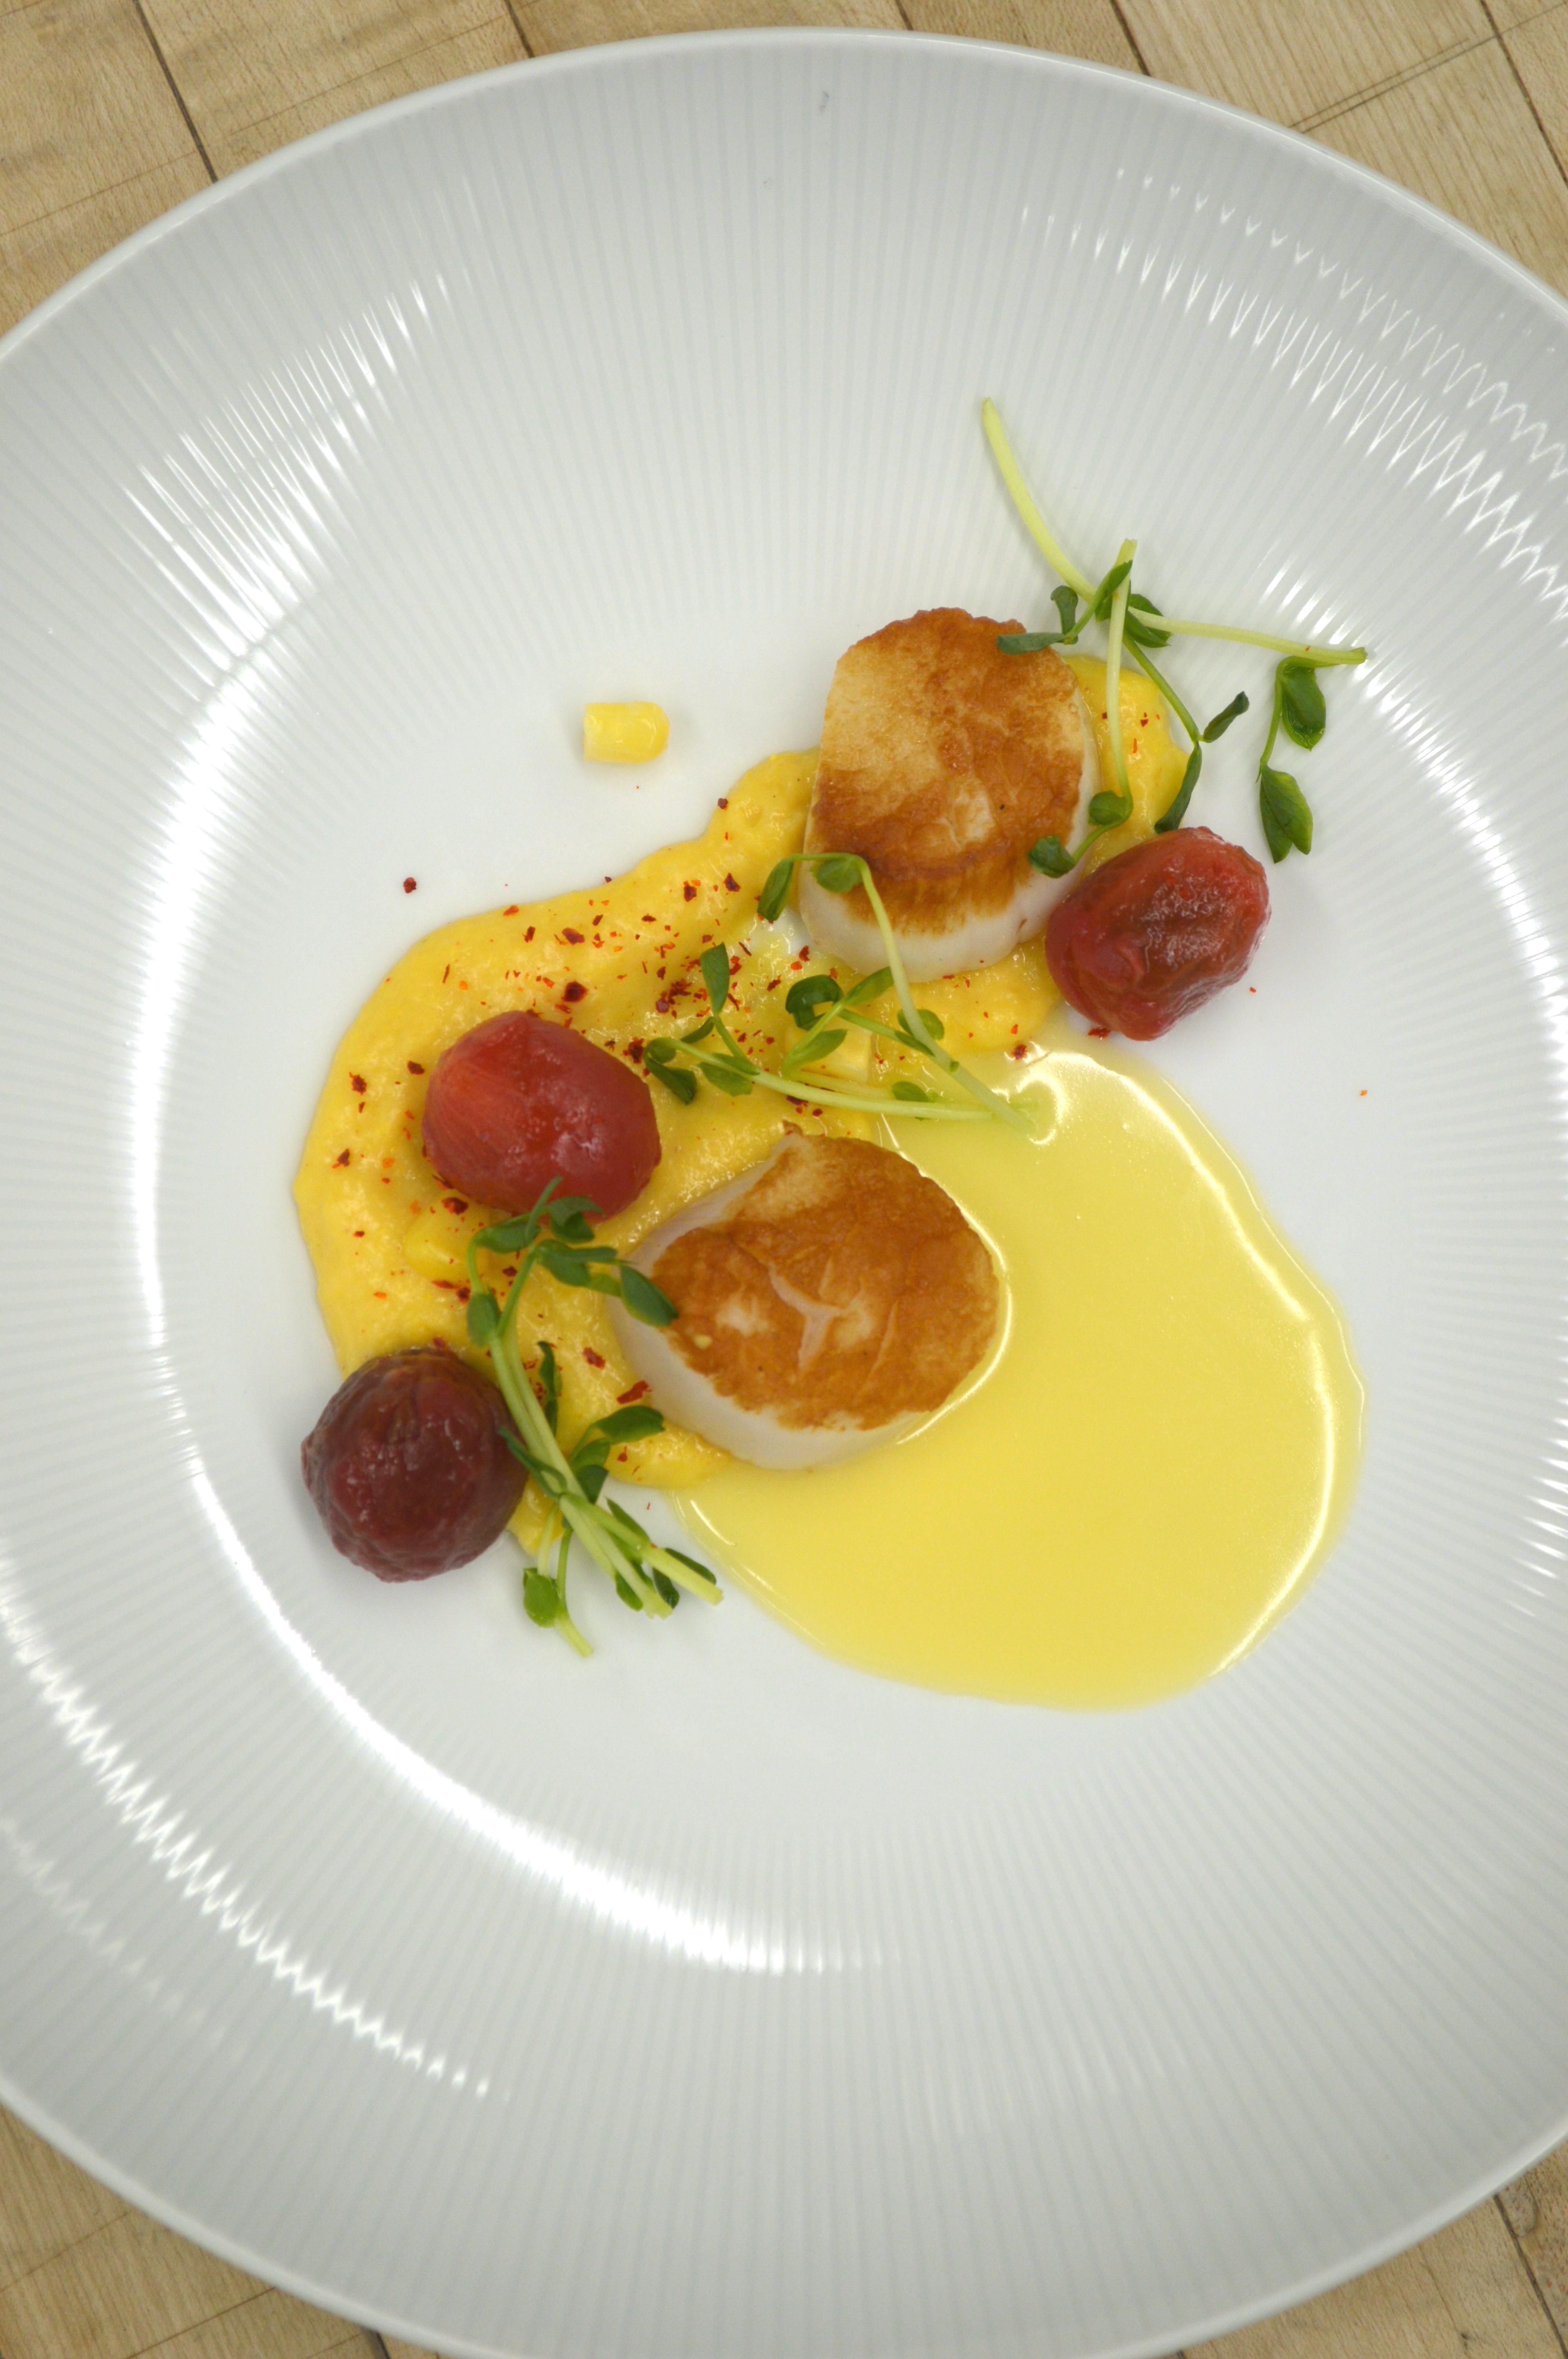 Seared scallops with a white chocolate beurre blanc.